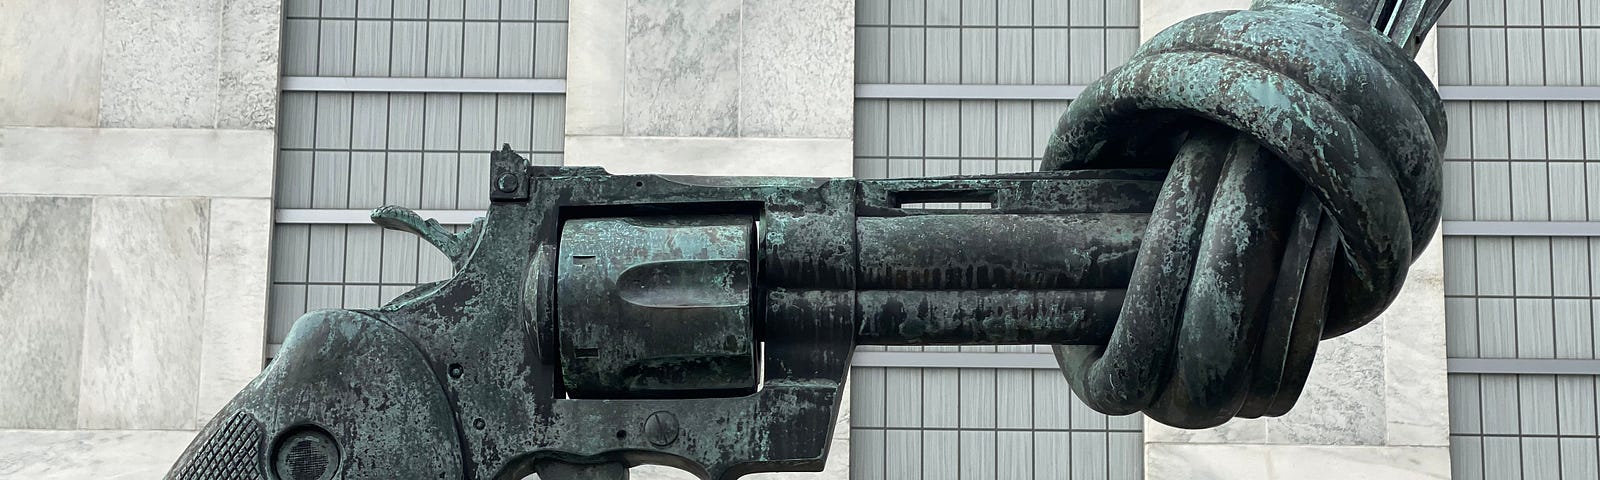 A statue of a gun, with the barrel twisted into a knot to prevent it from being able to fire.